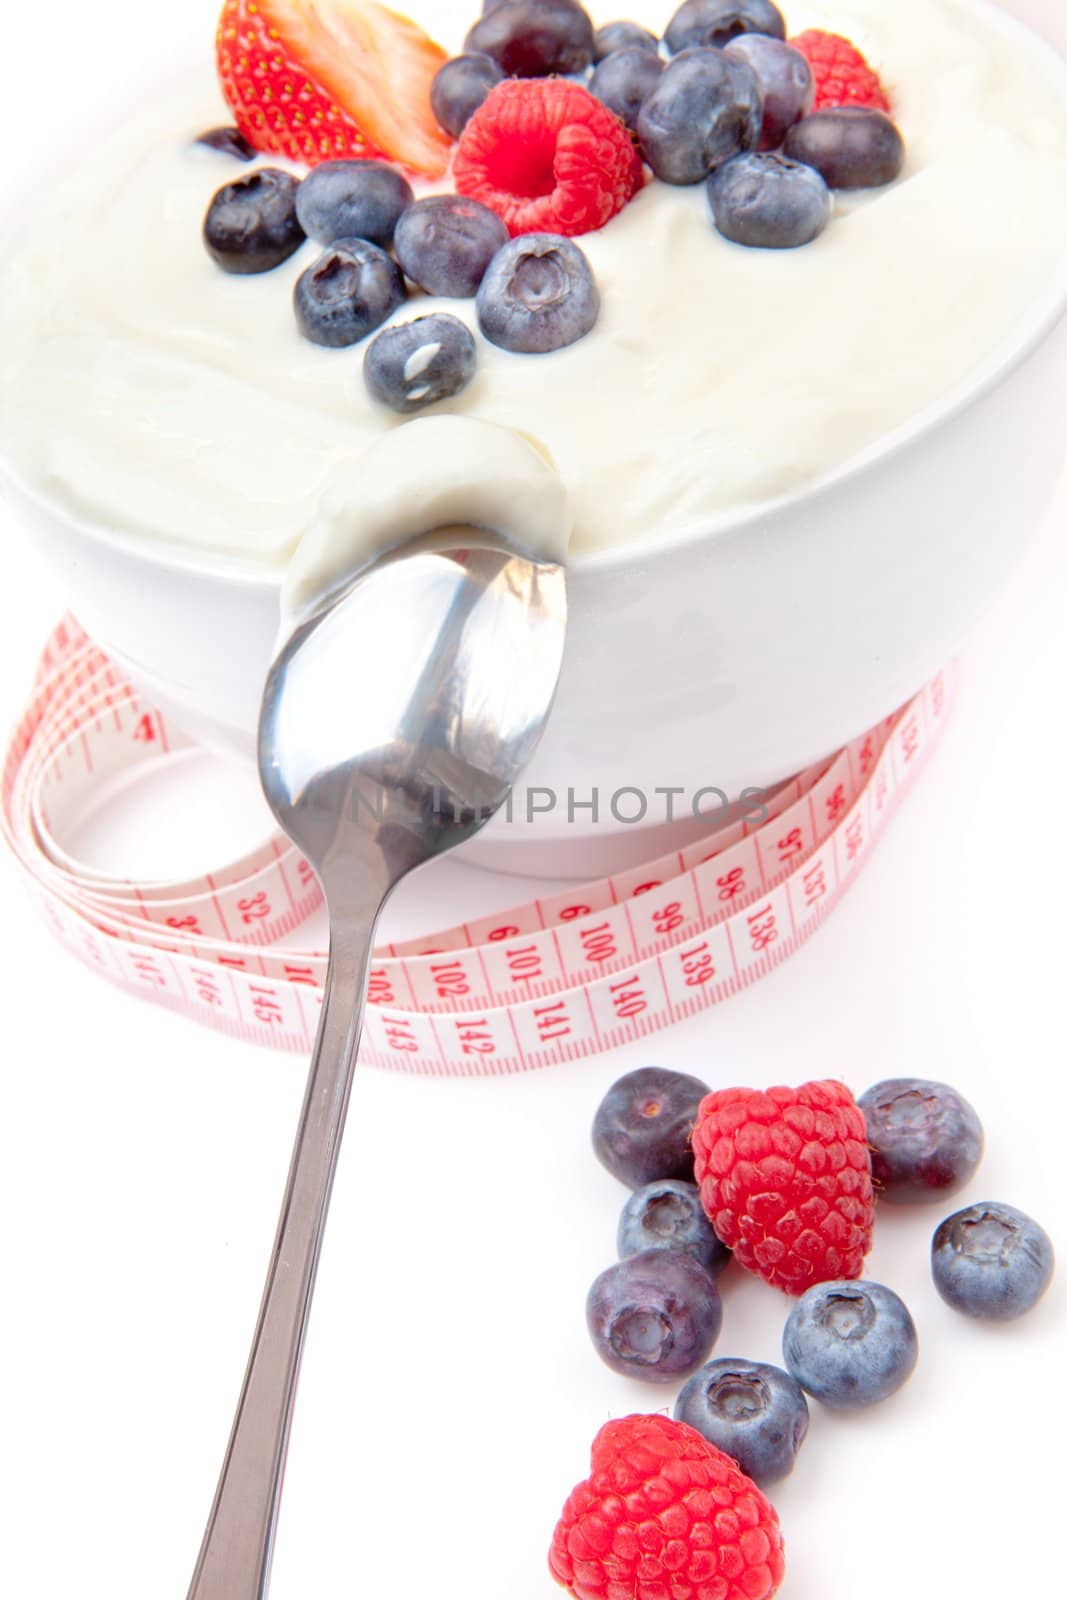 Berries cream and spoon with a tape measure  by Wavebreakmedia